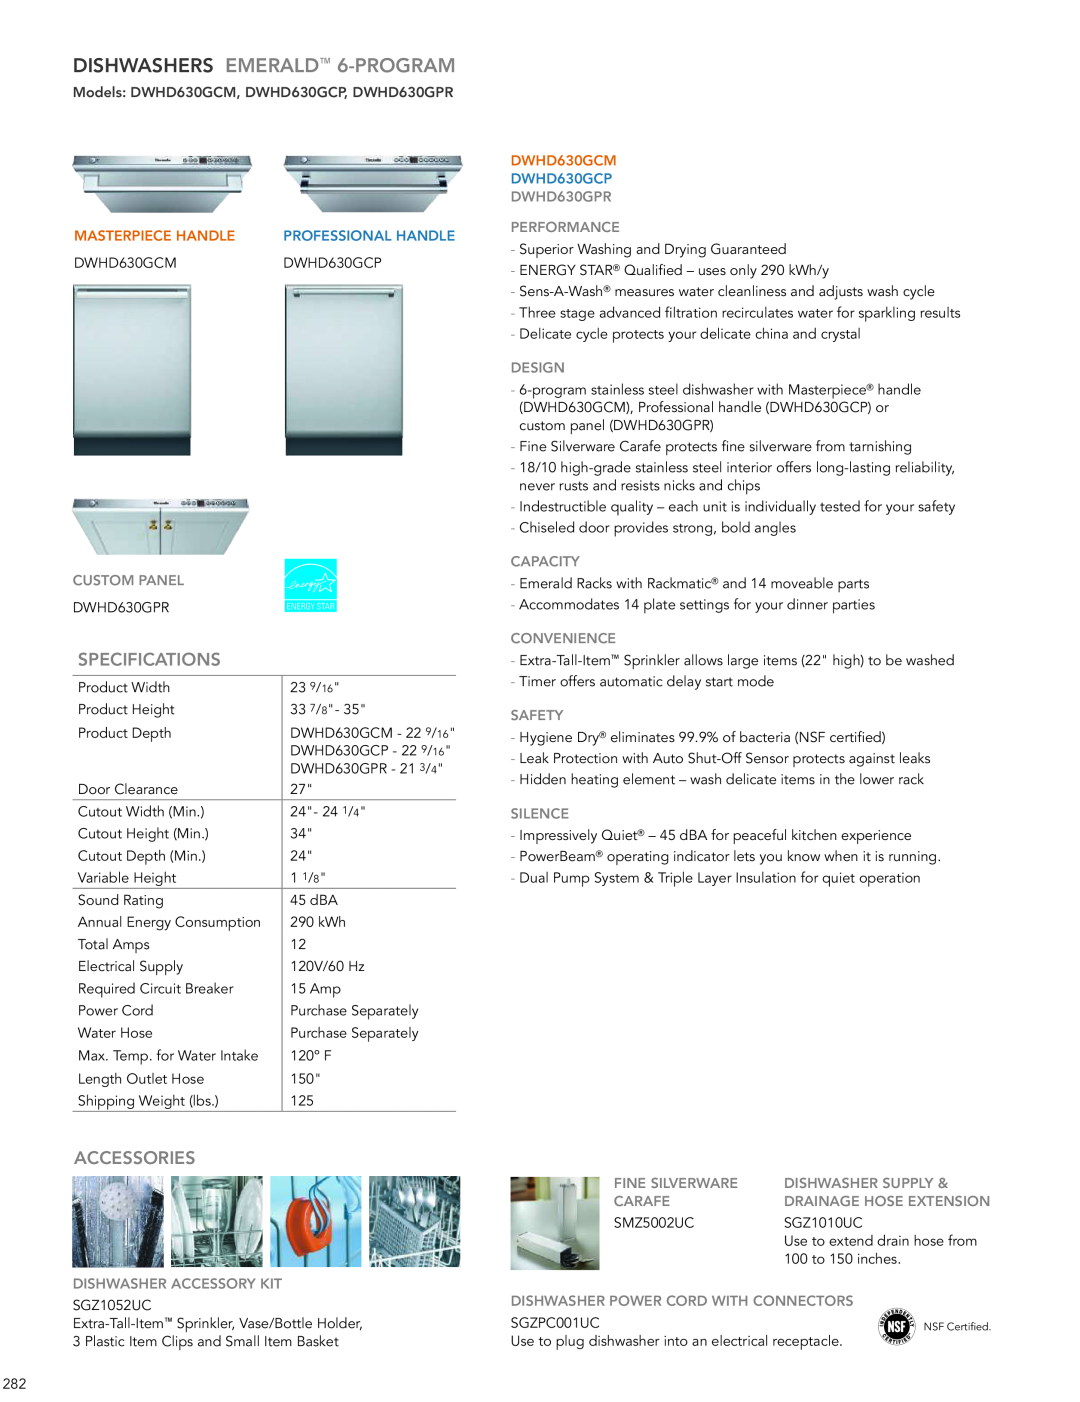 Thermador DWHD651GFP manual DISHWASHERS EMERALD 6-PROGRAM, Models DWHD630GCM, DWHD630GCP, DWHD630GPR, Professional Handle 